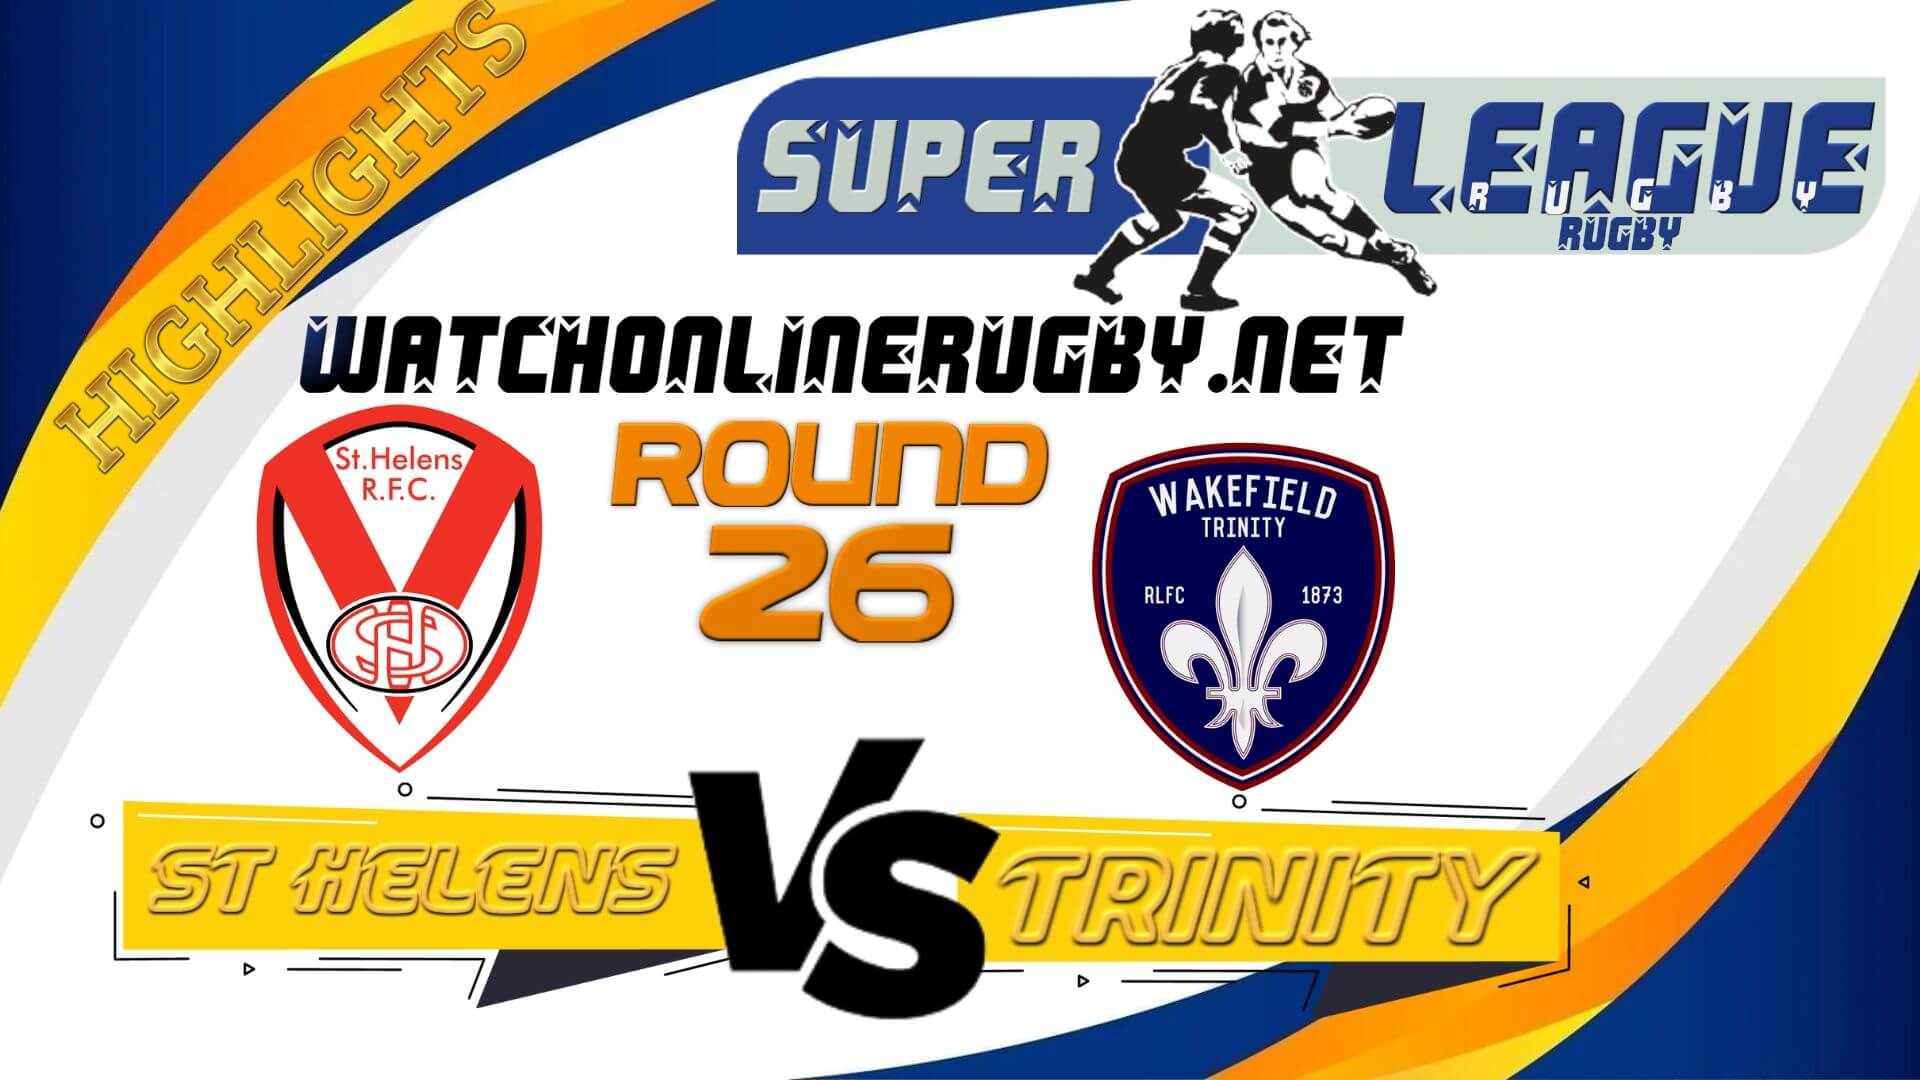 St Helens Vs Wakefield Trinity Super League Rugby 2022 RD 26